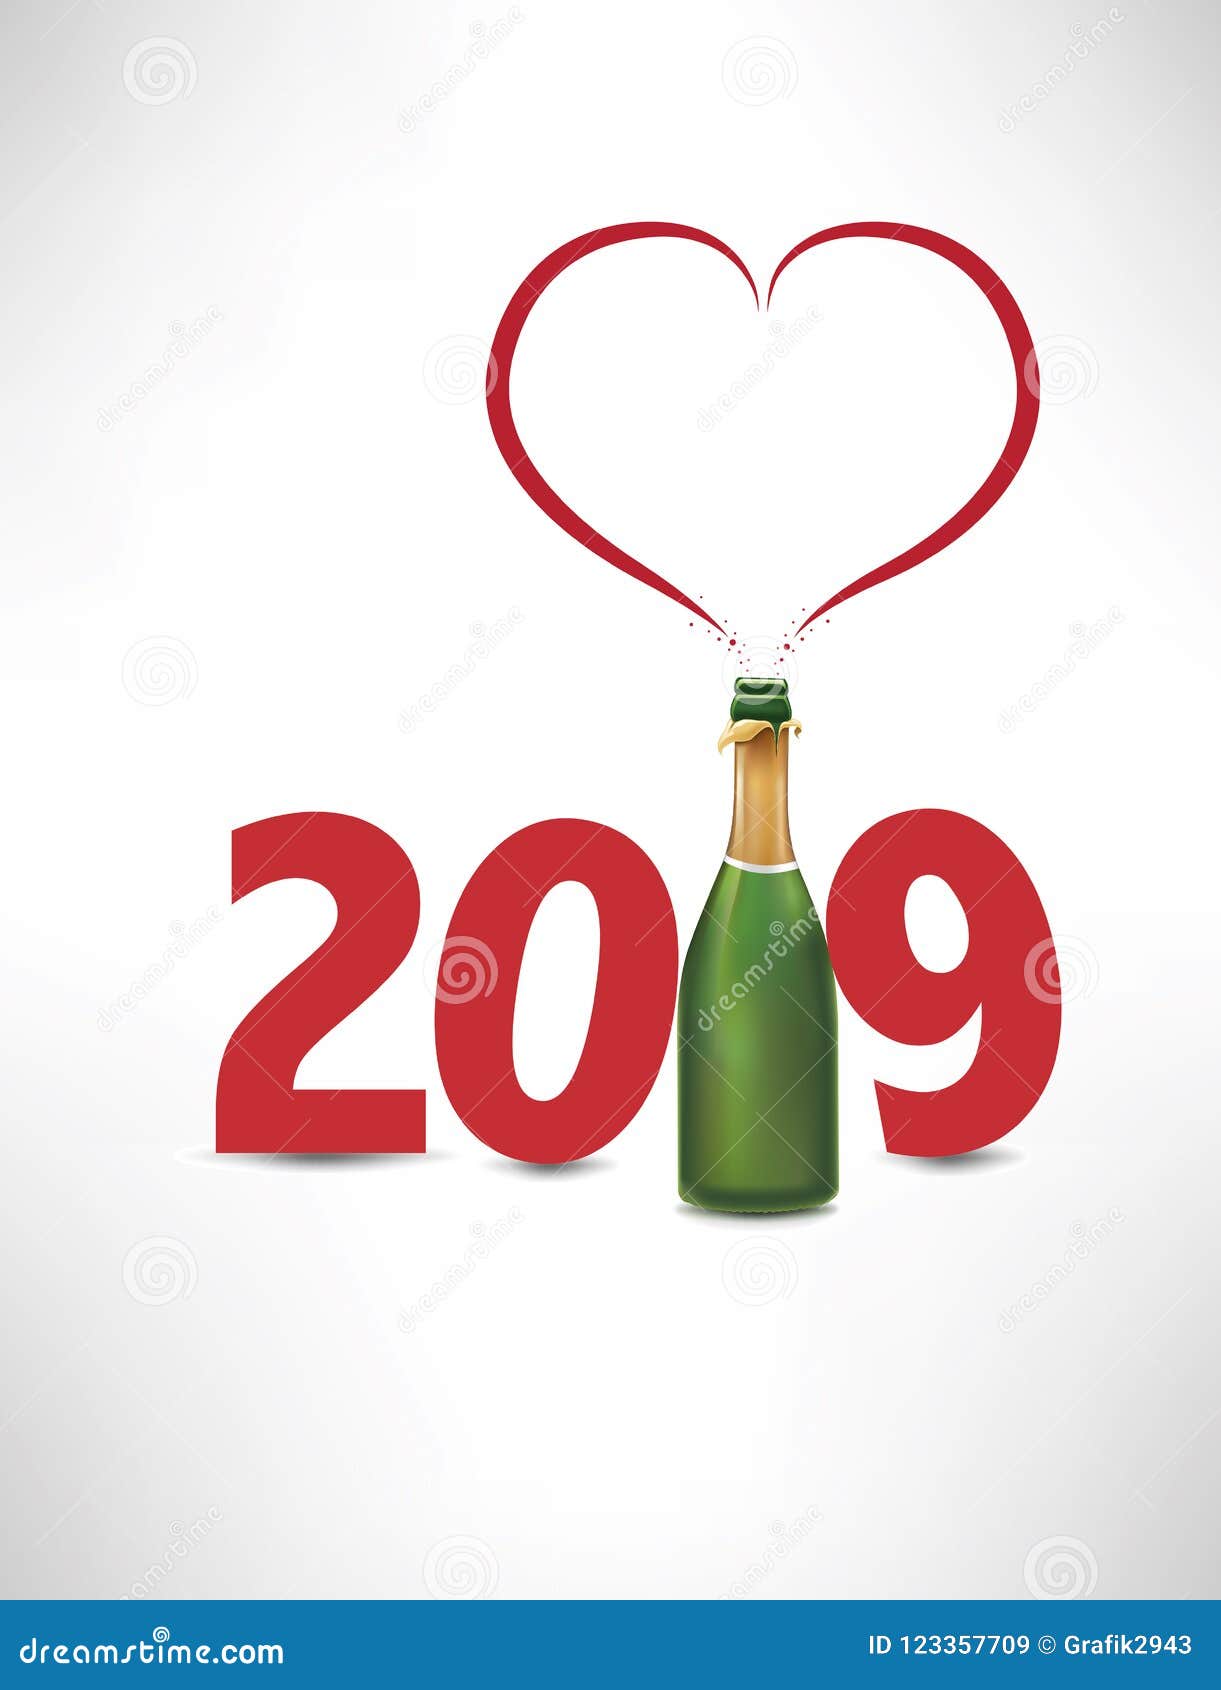 19 Happy New Year Card With Champagne Bottle And Heart Symbol Stock Vector Illustration Of Concept Calendar